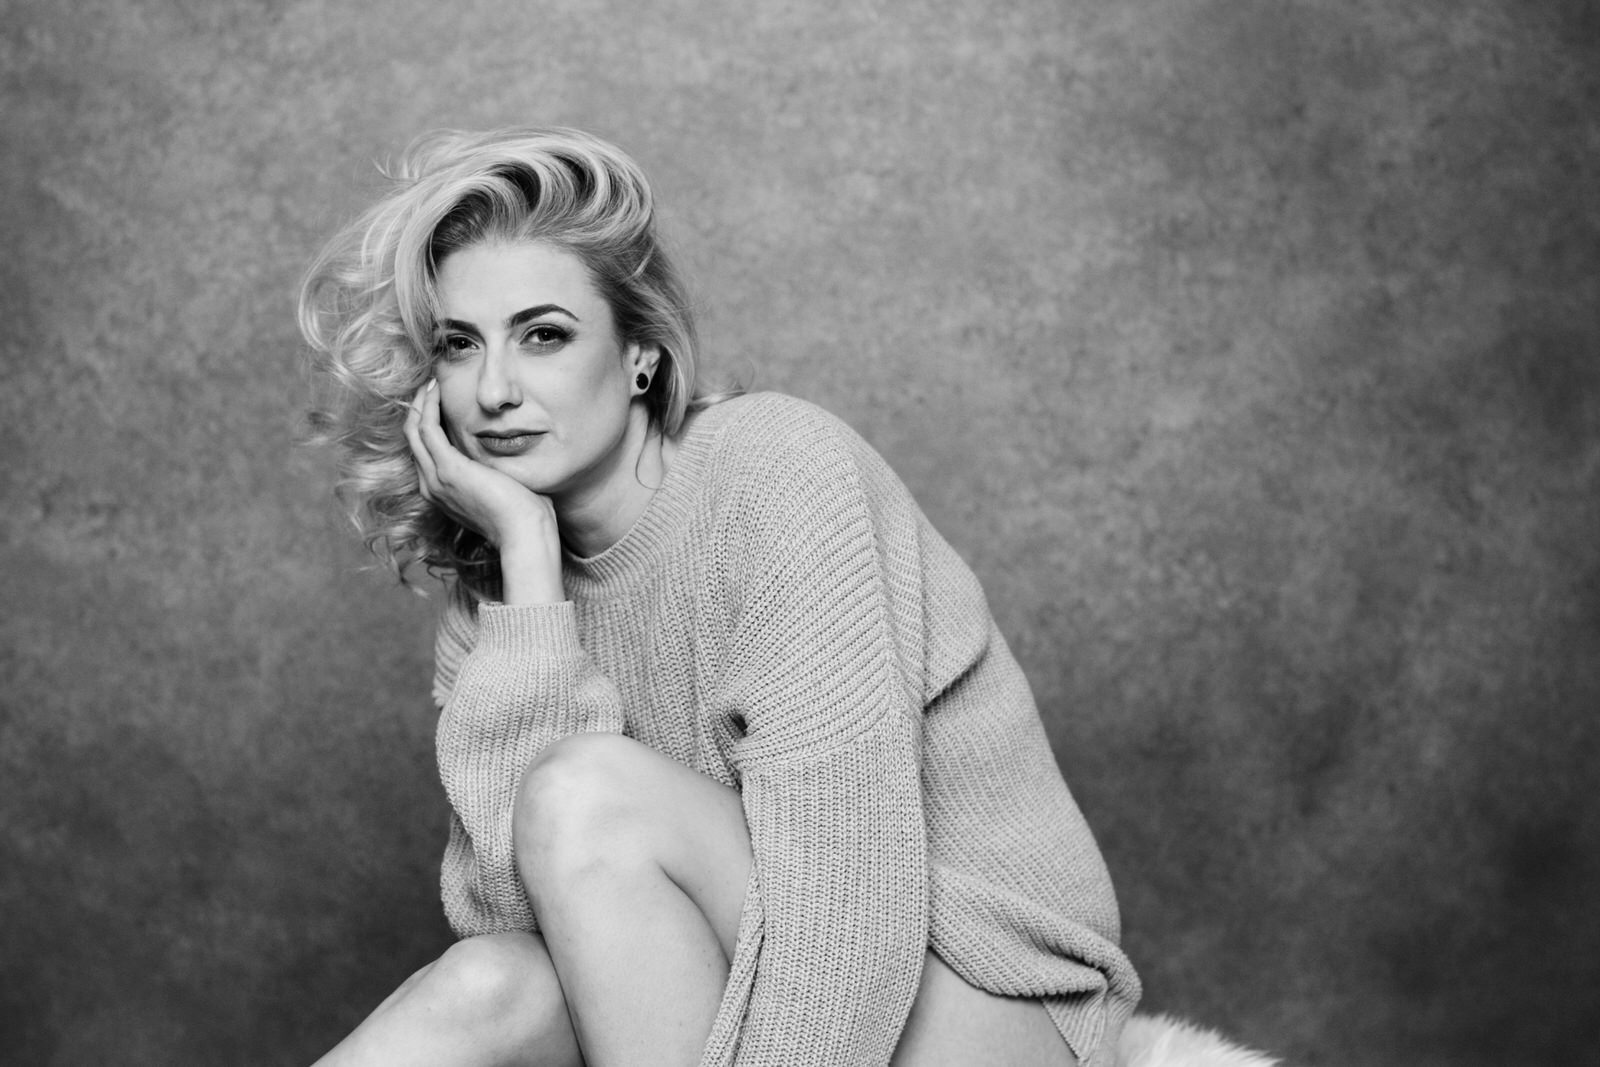 Vancouver Boudoir photoshoot with Black and white artistic timeless portraits of blonde woman with an edgy vibe with a cozy sweater